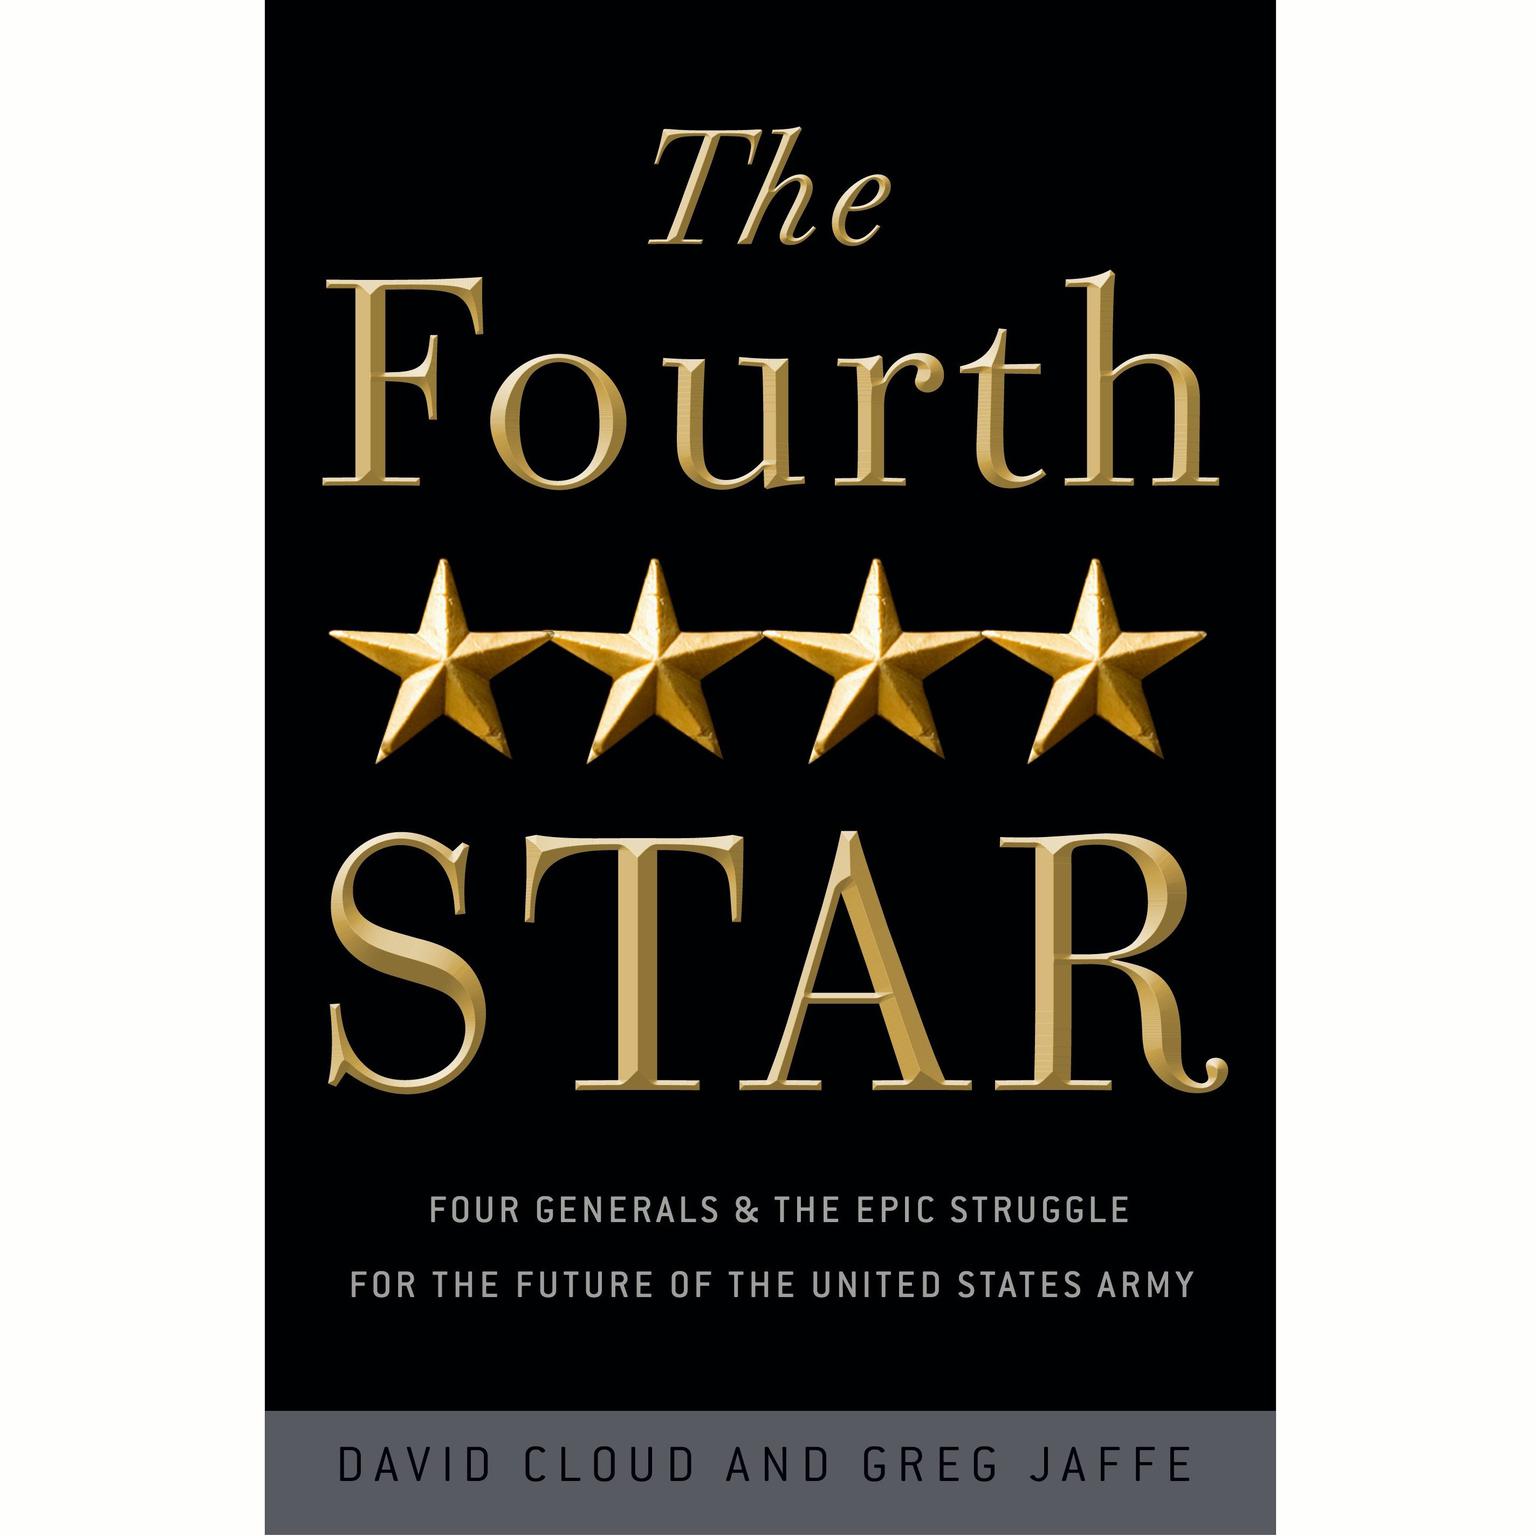 The Fourth Star: Four Generals and the Epic Struggle for the Future of the United States Army Audiobook, by Greg Jaffe